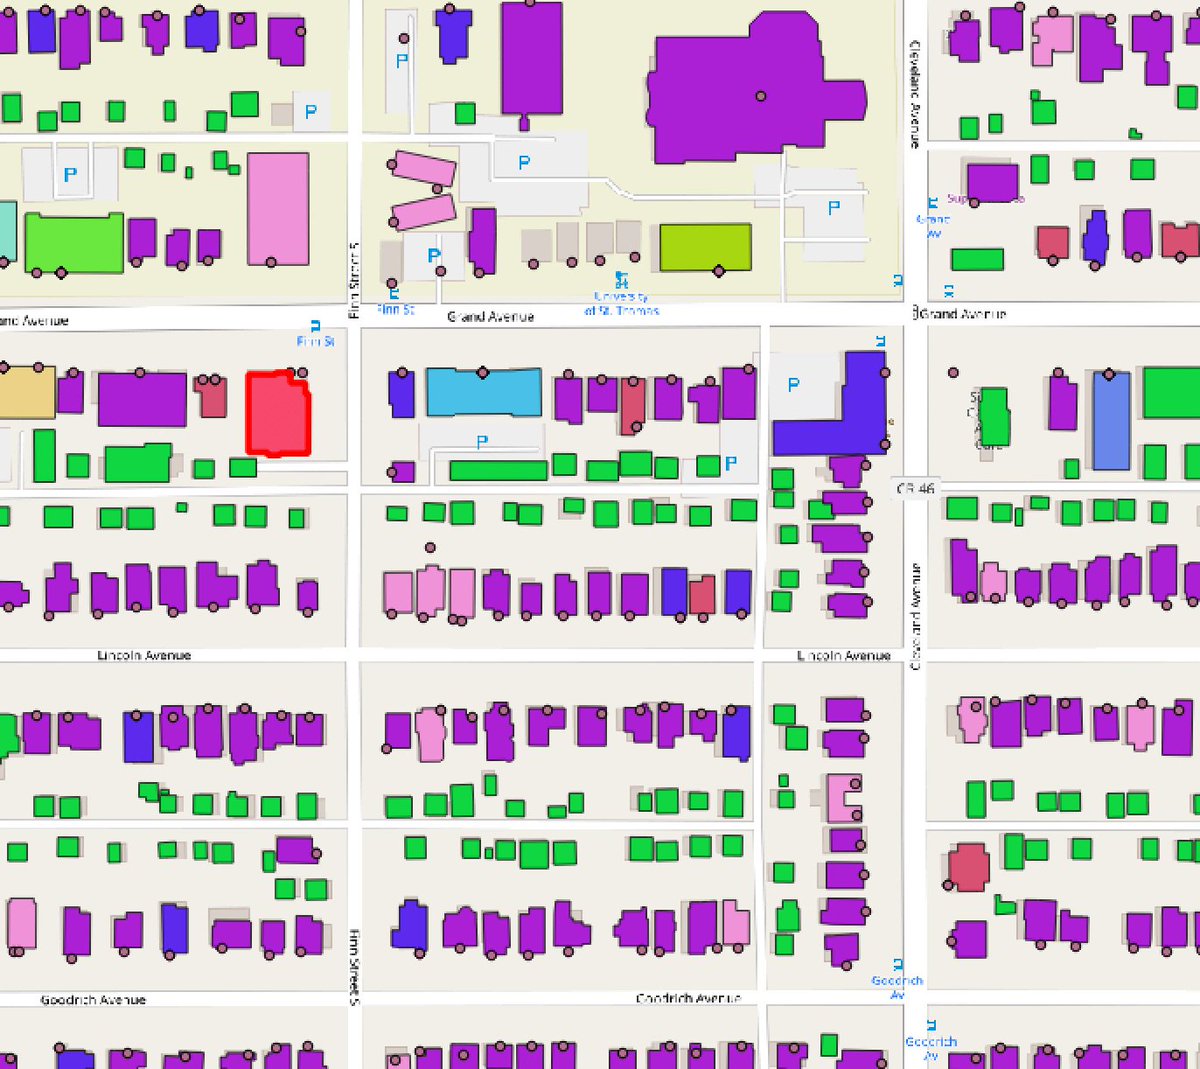 Playing with TurfJS + Tippecanoe + esri2geojson + OSM QA tiles to help me better map buildings and addresses. This stack of tools makes improving OSM quite a bit more efficient.